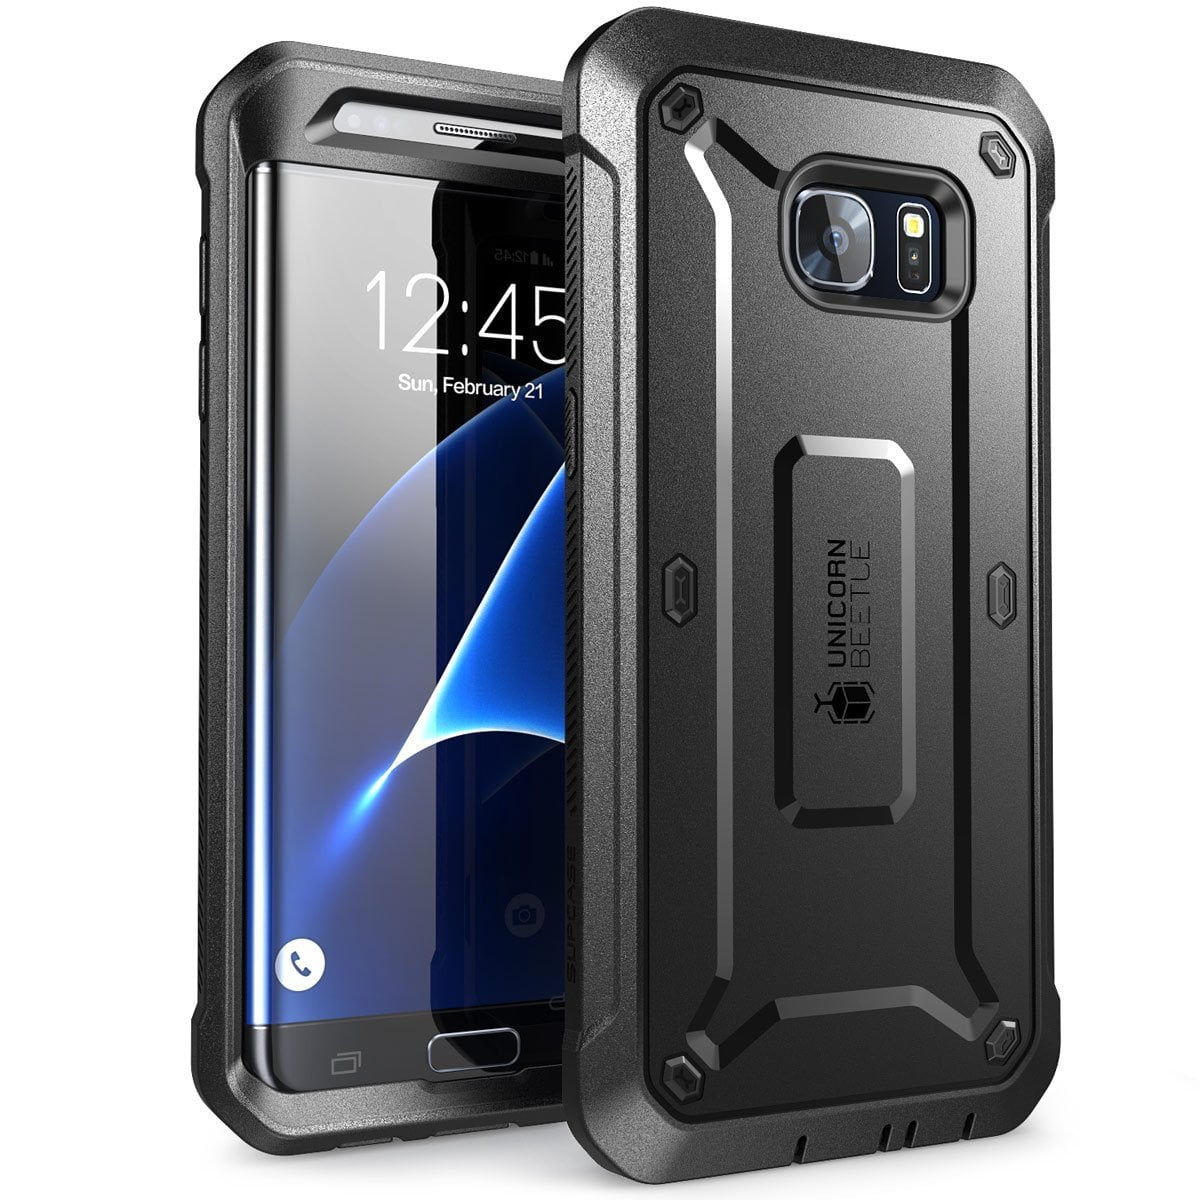 Galaxy S7 Edge Case, SUPCASE,Full-body Rugged Holster Case WITHOUT Screen  Protector for Samsung Galaxy S7 Edge-Black